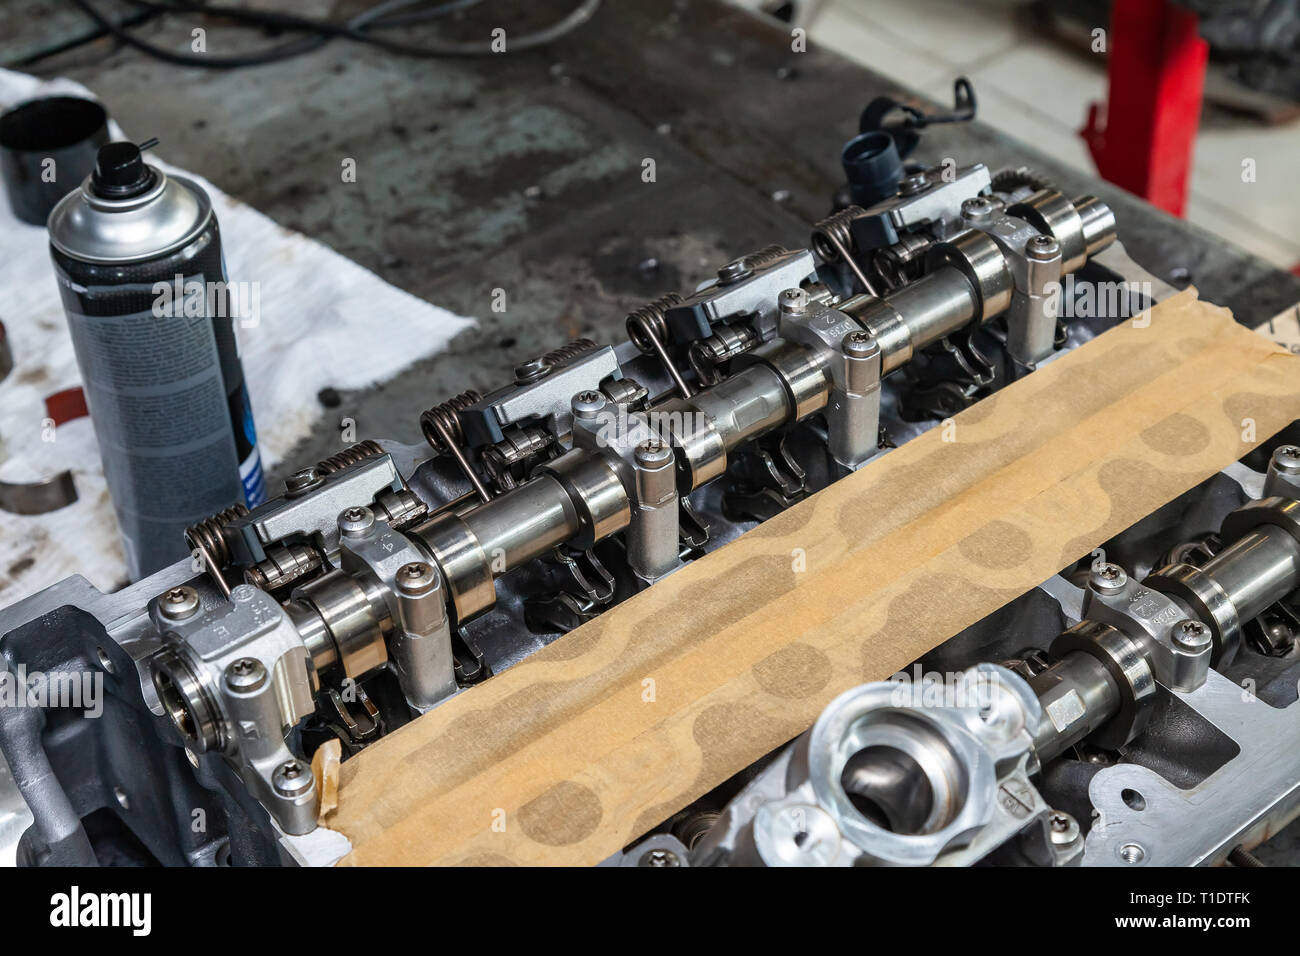 A four-cylinder engine with new camshaft dissembled and removed from car on a workbench in a vehicle repair workshop. Auto service industry. Stock Photo